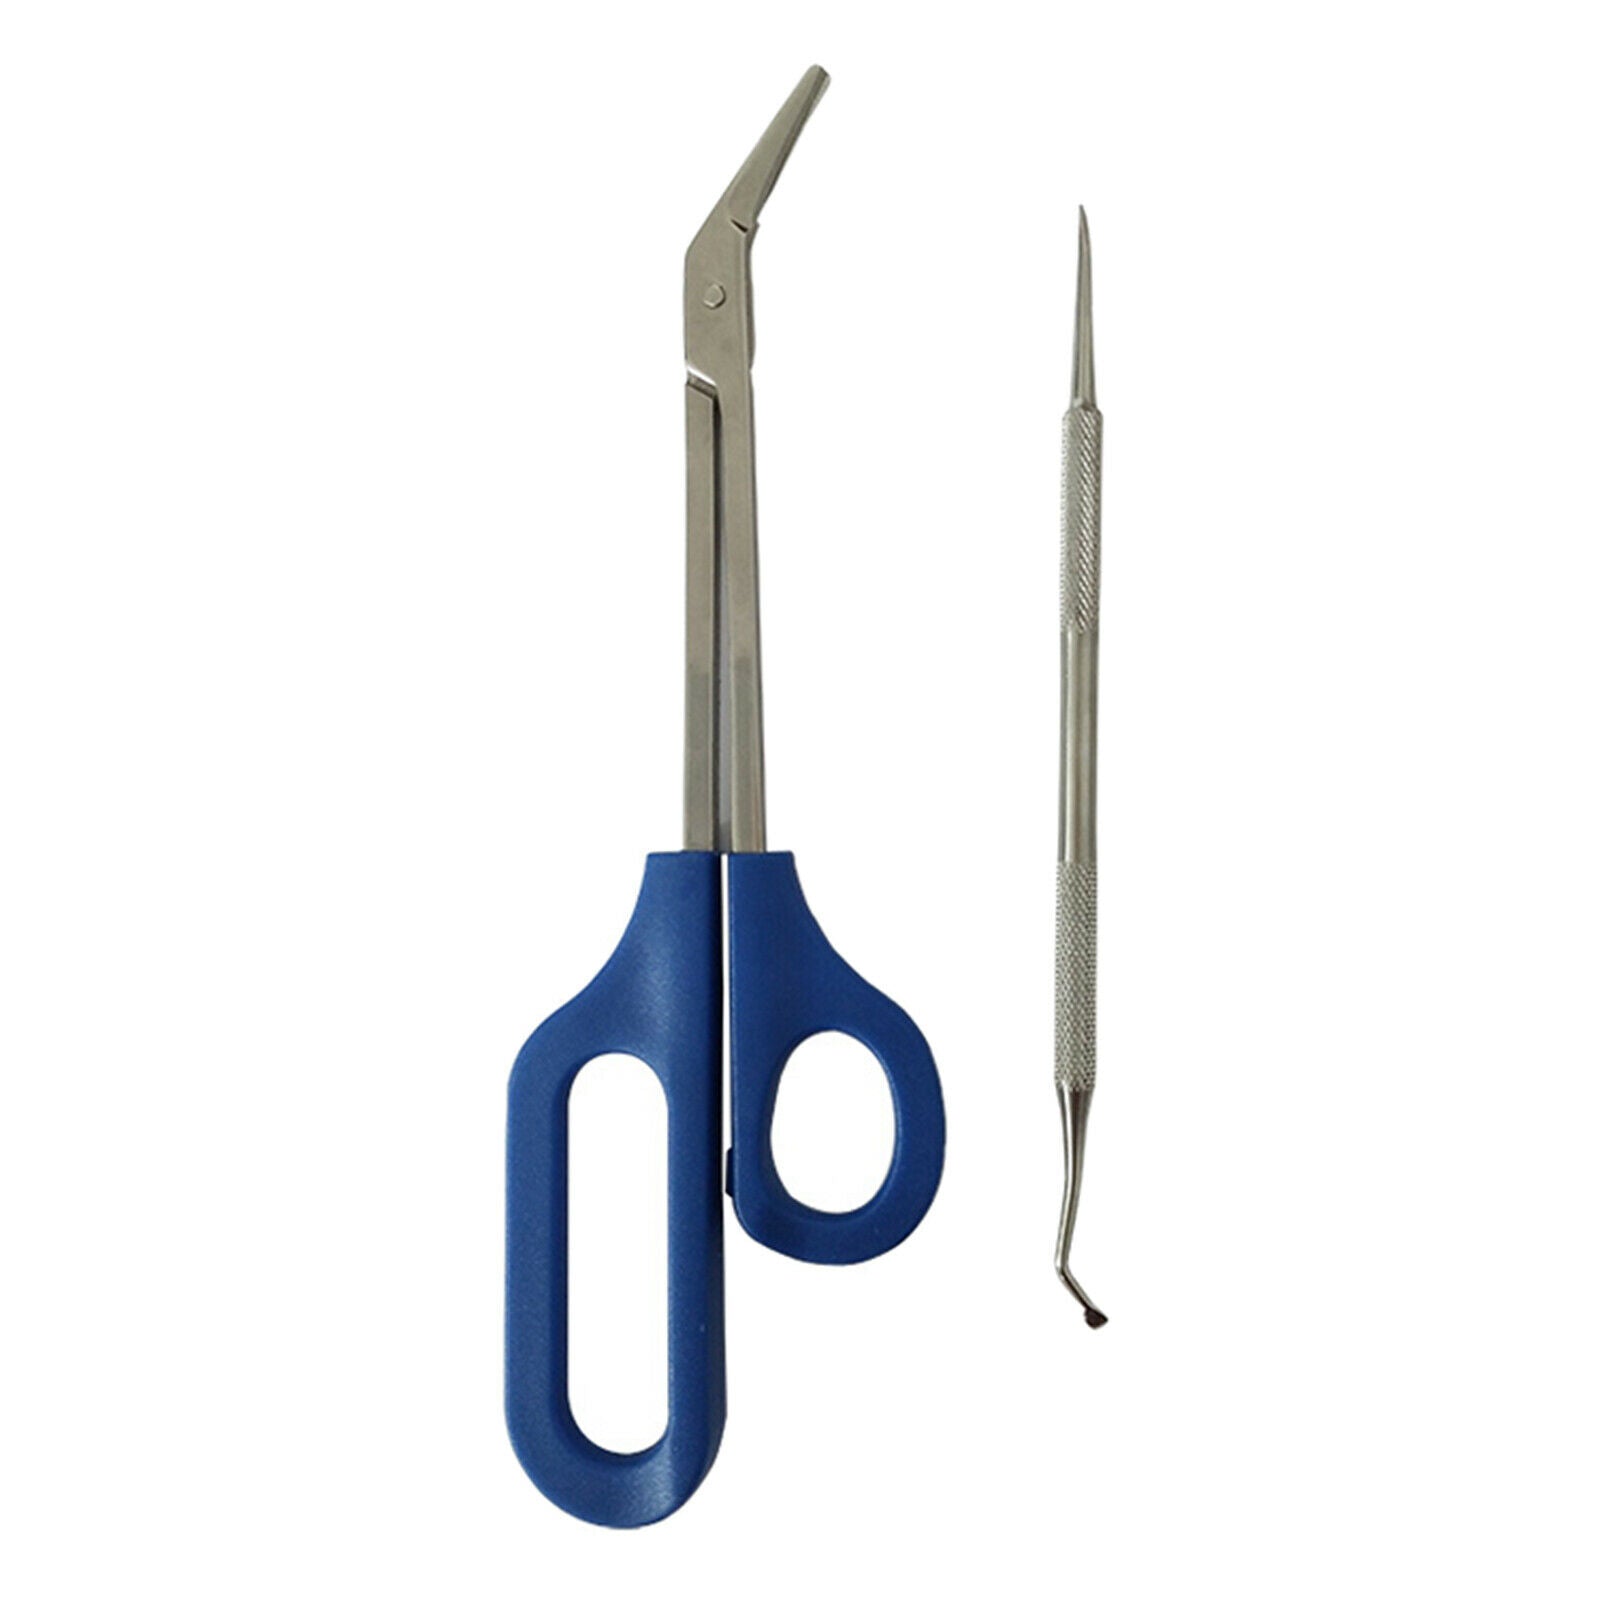 Stainless Steel Long Reach Toenail Scissors  Humanized Design Easy Use Clippers